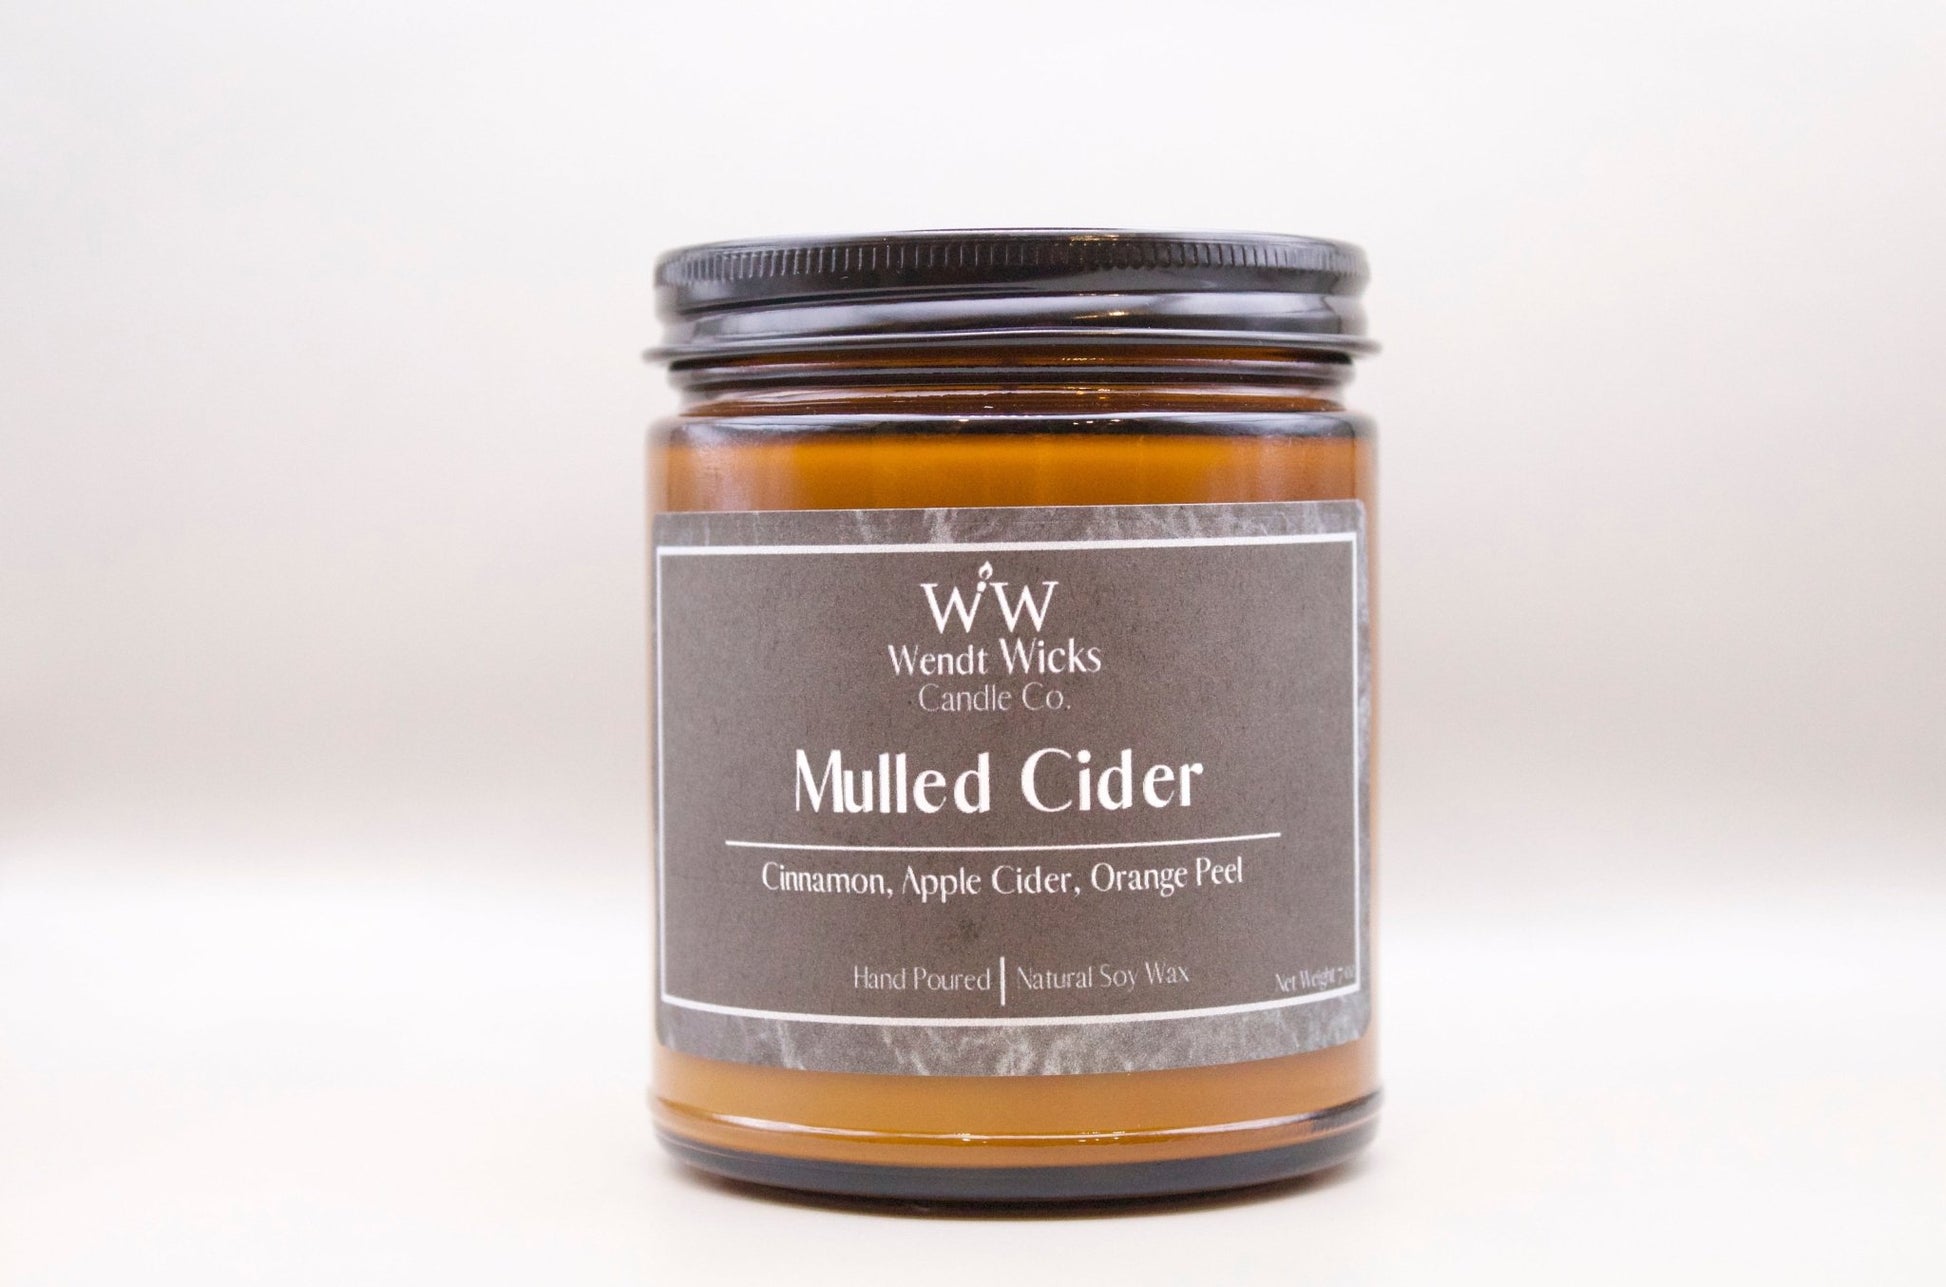 Mulled Cider - Wendt Wicks Candle Co. - Amber candle